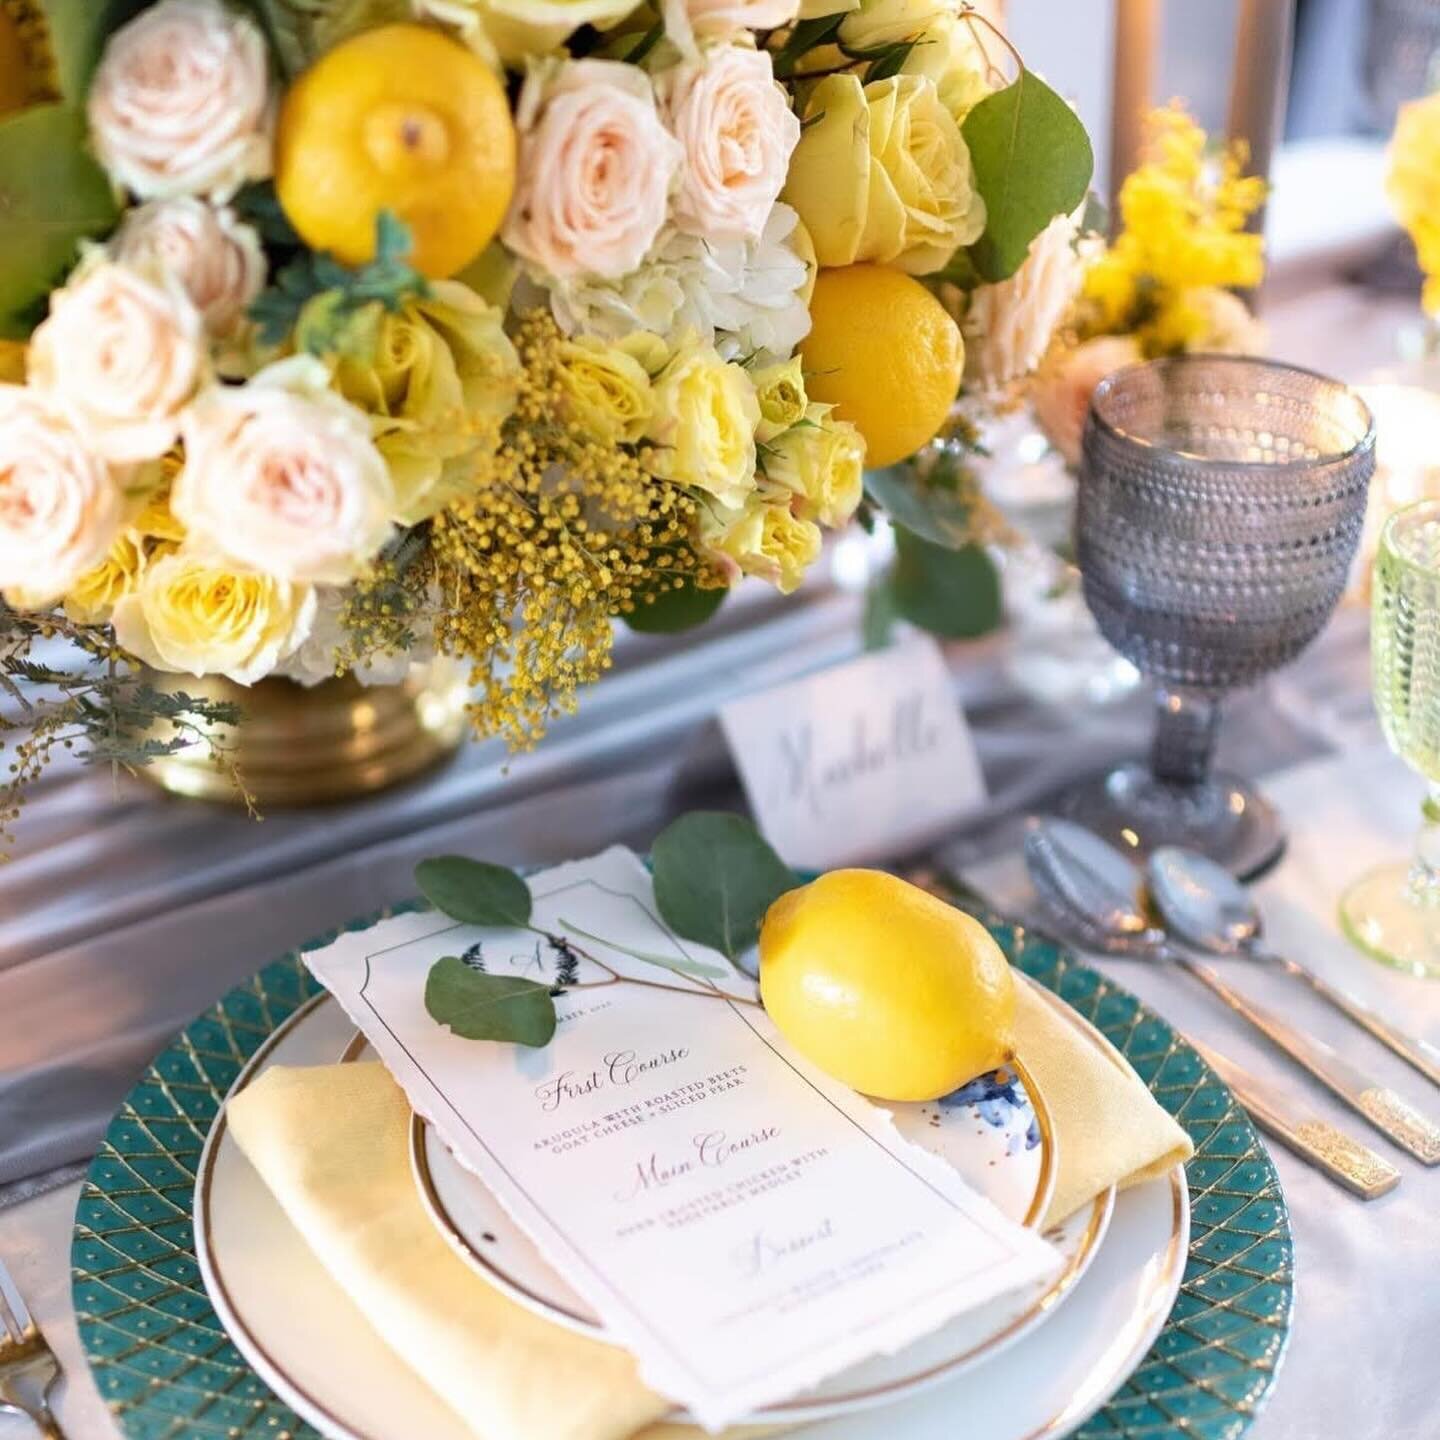 Now that spring is here, we are preparing to dive into our clients spring theme affair that awaits&hellip;

Yellows are such a welcoming color which also represents new beginnings. Just in time for the Easter festivities&hellip;

📸 niceemartin